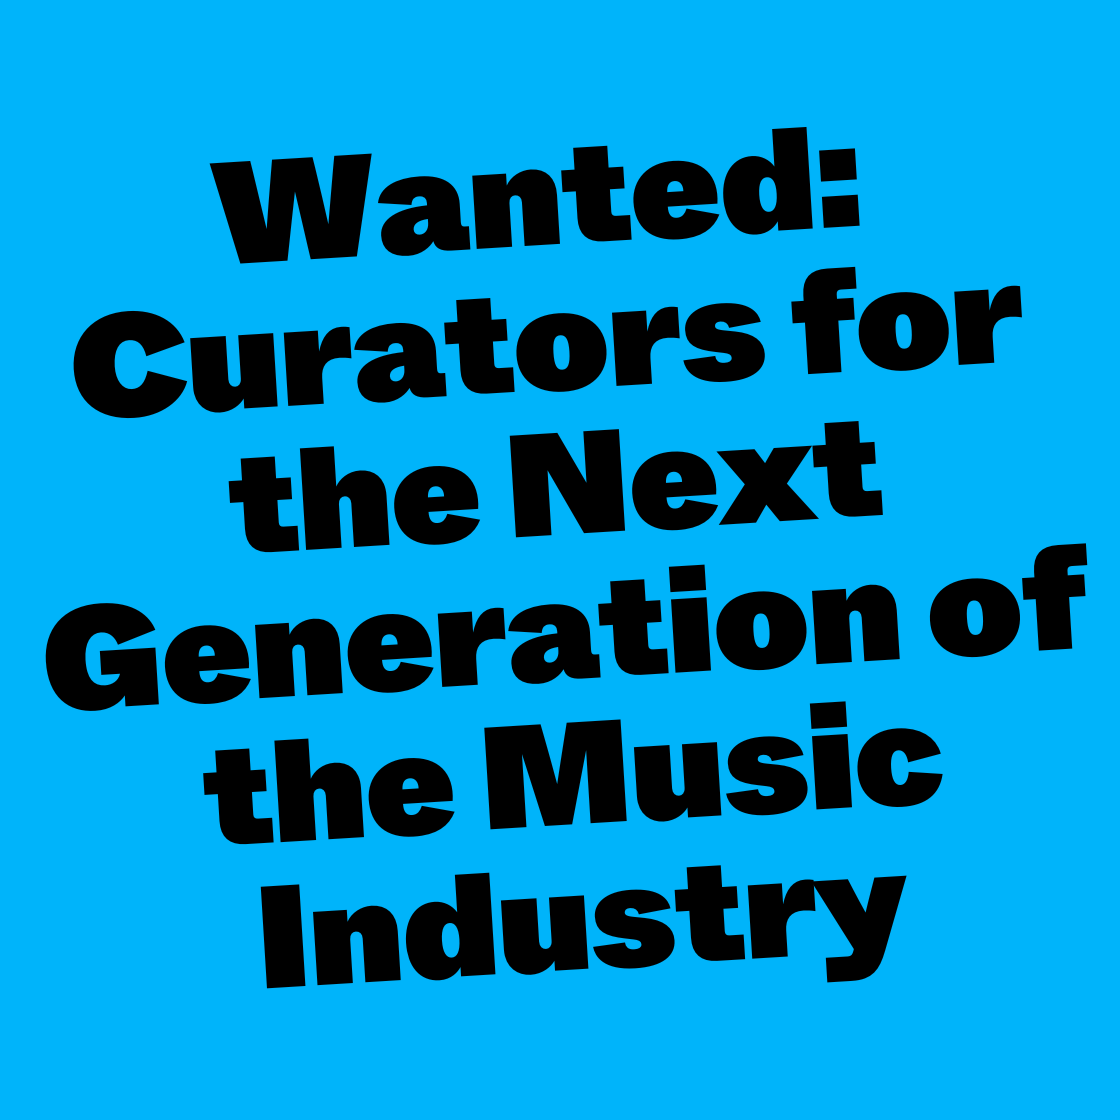 Wanted: Curators for the Next Generation of the Music Industry